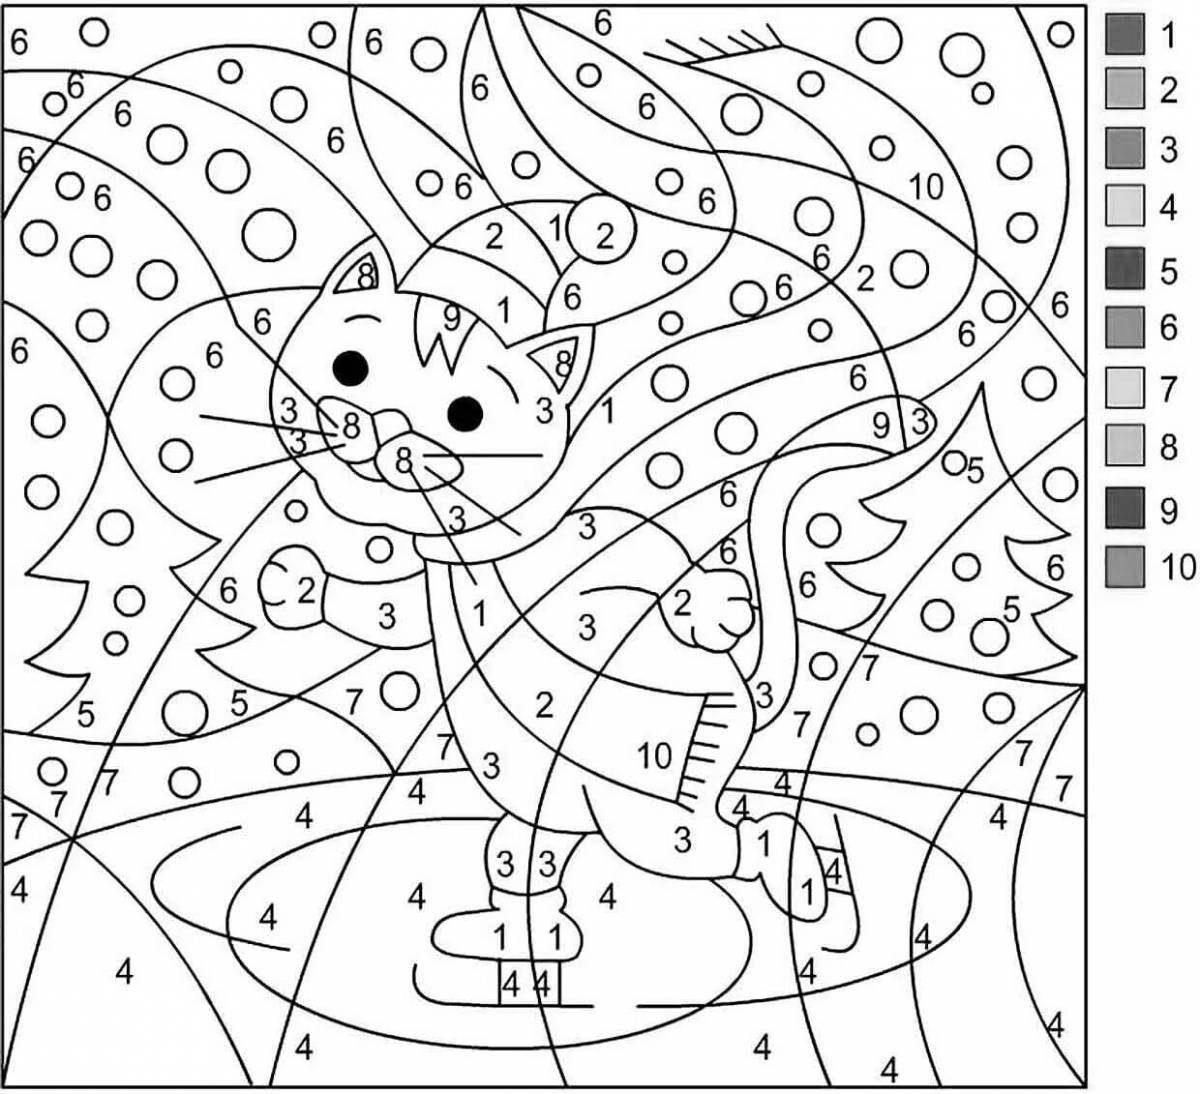 Easy-by-numbers inviting coloring book